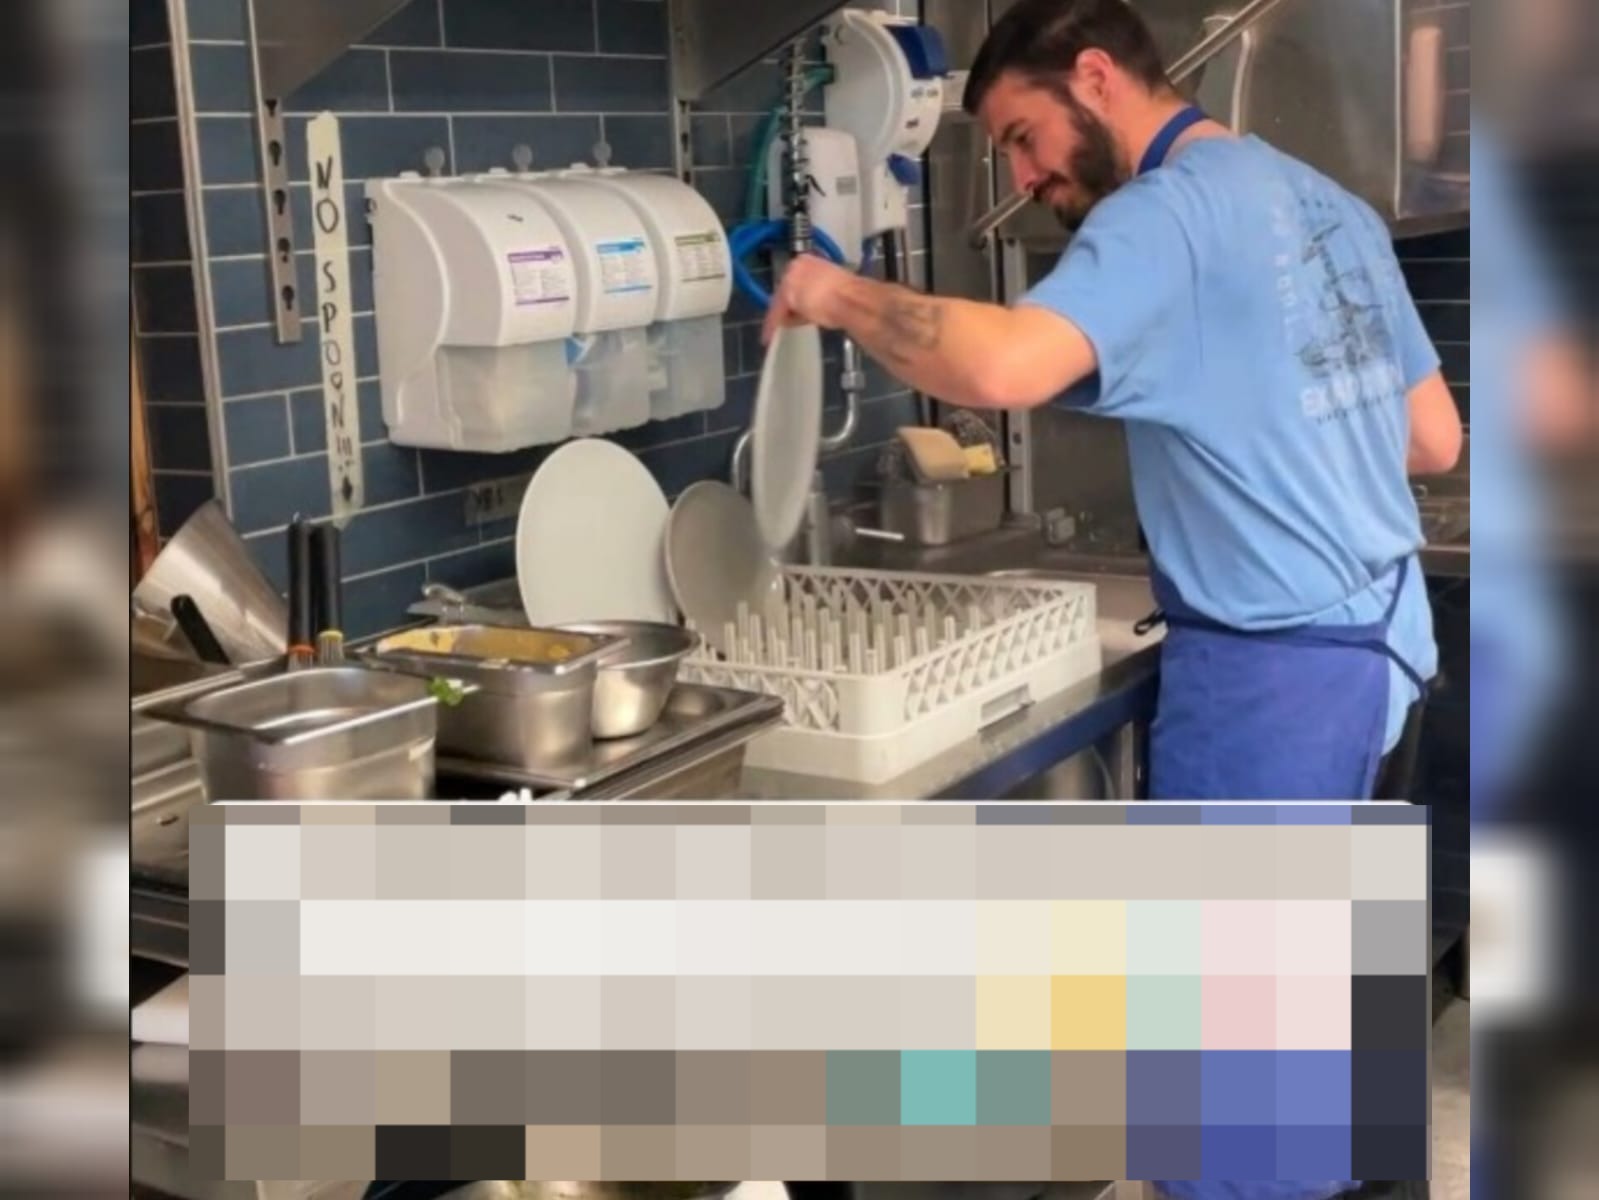 He surprises the young man by revealing how much he earns working as a dishwasher in Switzerland